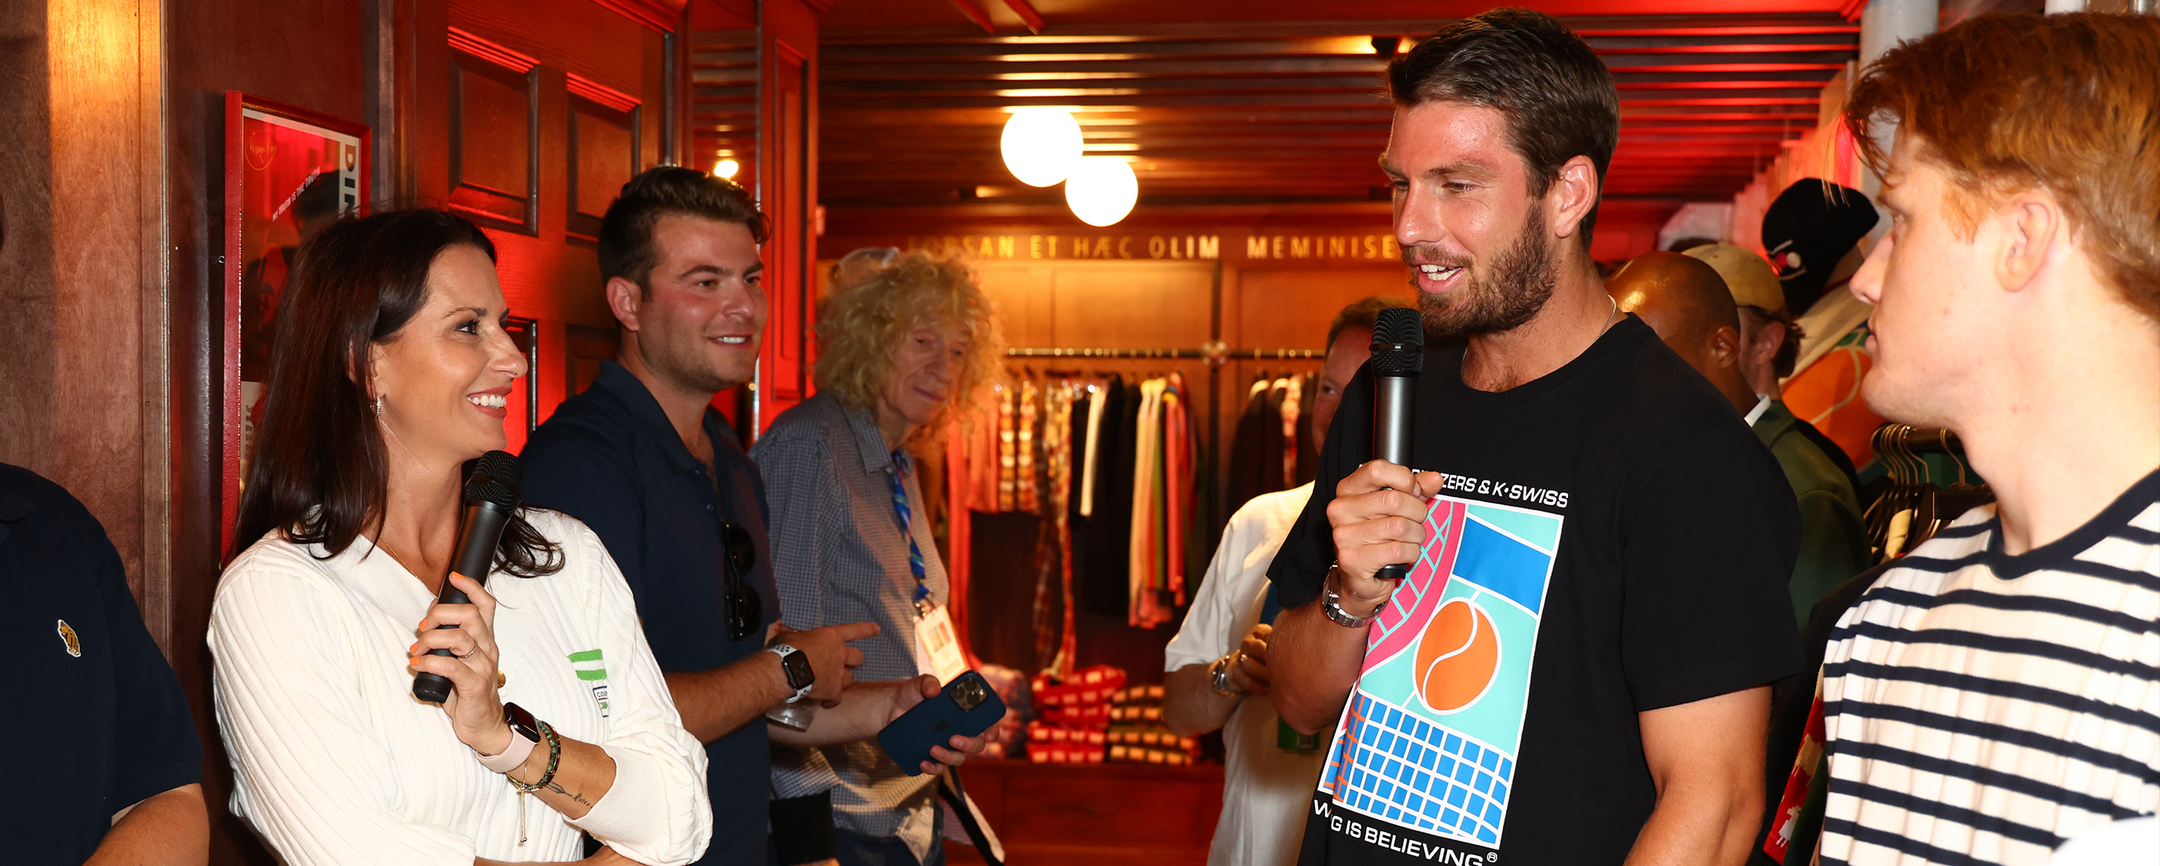 THE K-SWISS LAUNCH PARTY FT. CAM NORRIE